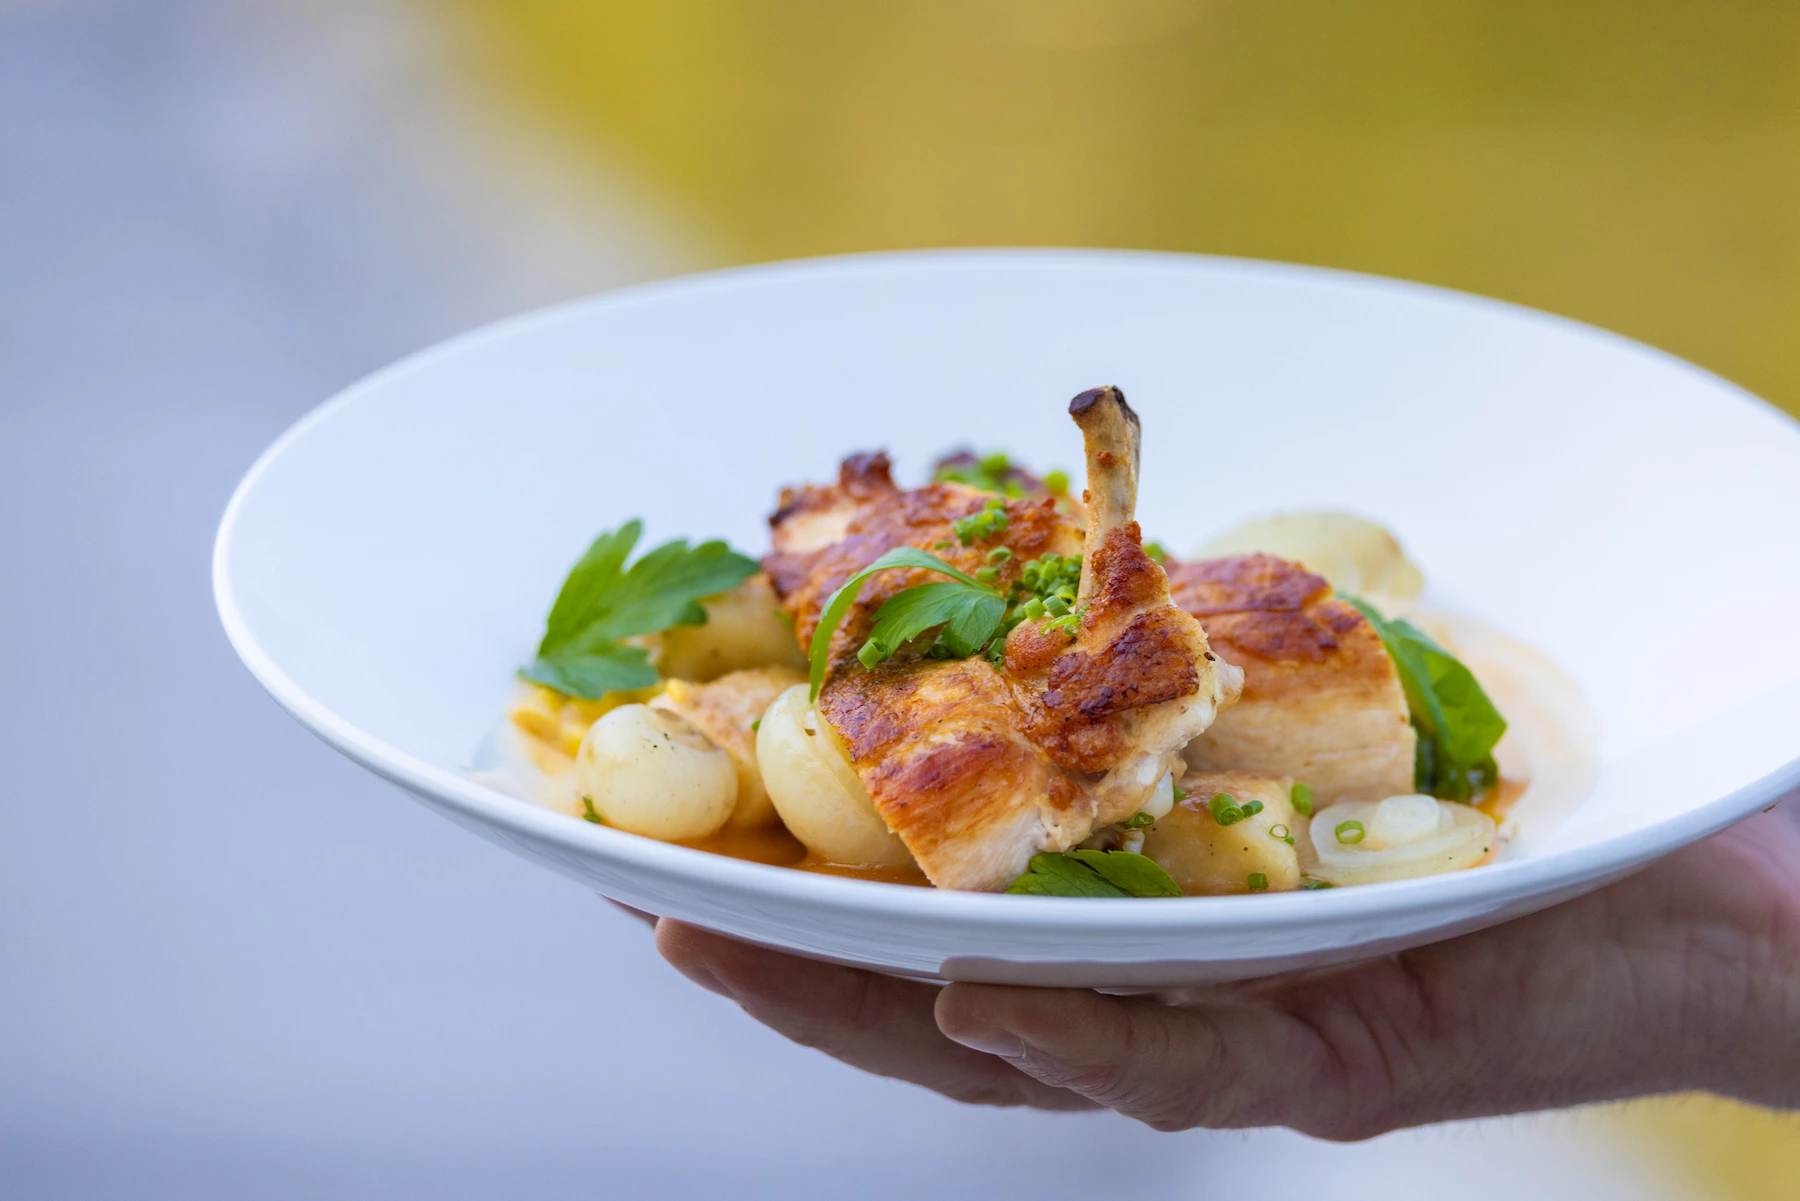 A server is holding a plate with a golden-browned chicken leg and thigh, garnished with green herbs, accompanied by small potatoes and onions.